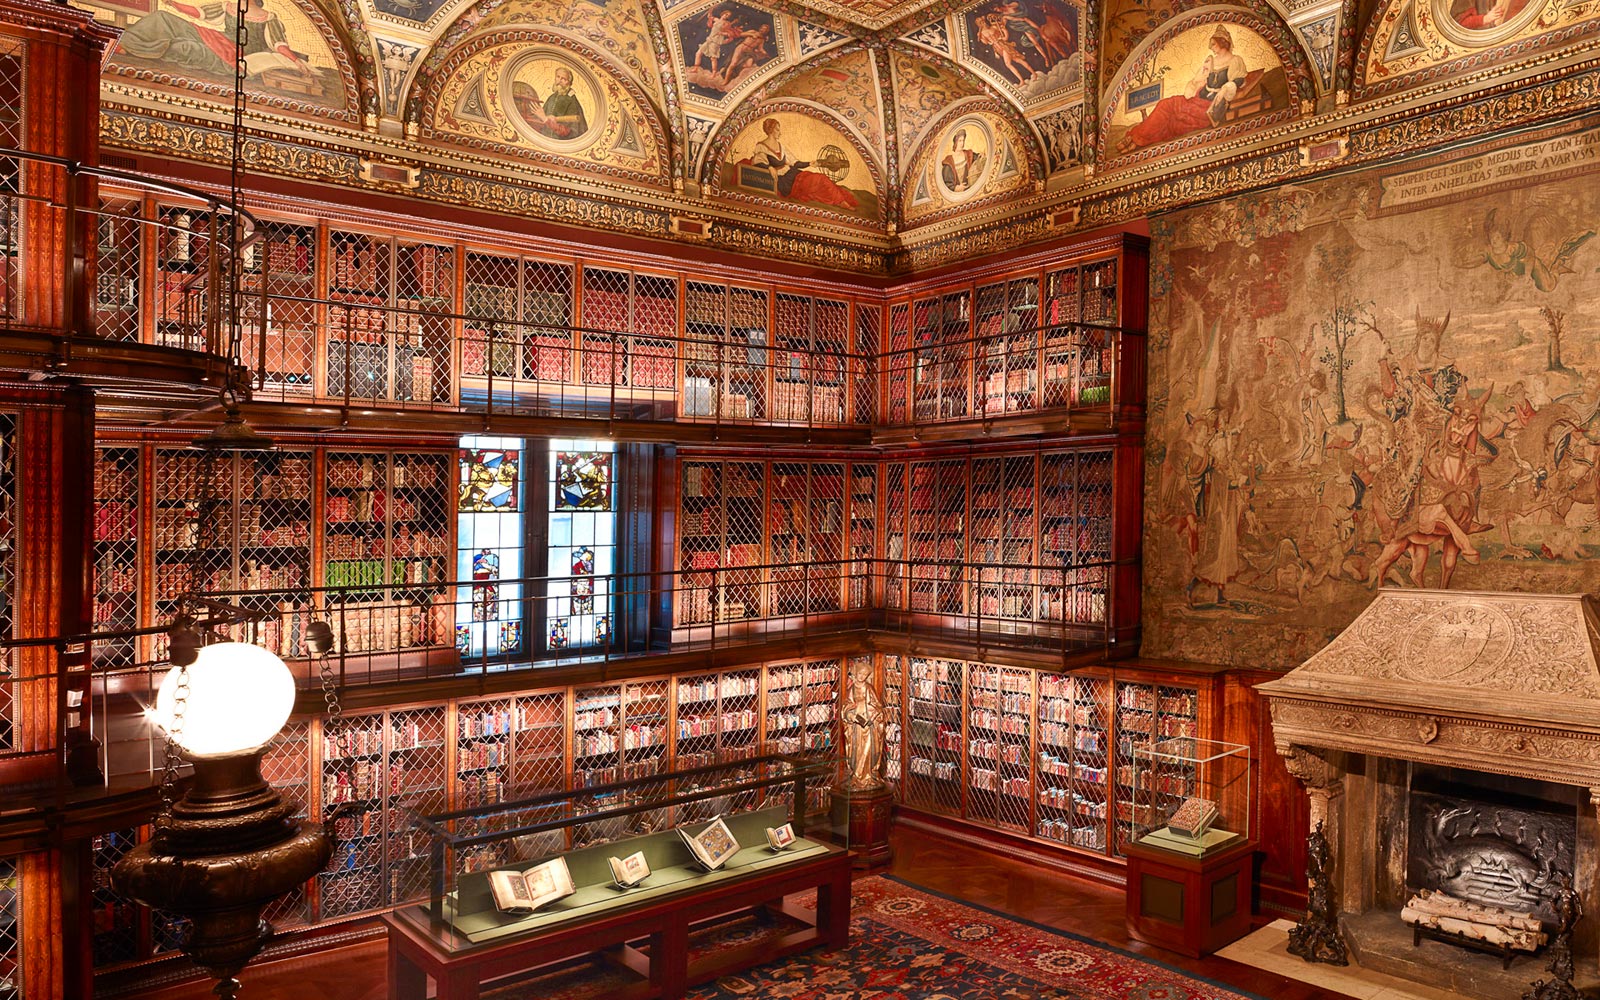 Interior space of J. Pierpont Morgan’s Library with ornate muraled gold ceiling, bookshelves, a tapestry hanging on the wall over a fireplace, and display cases on the floor containing books.